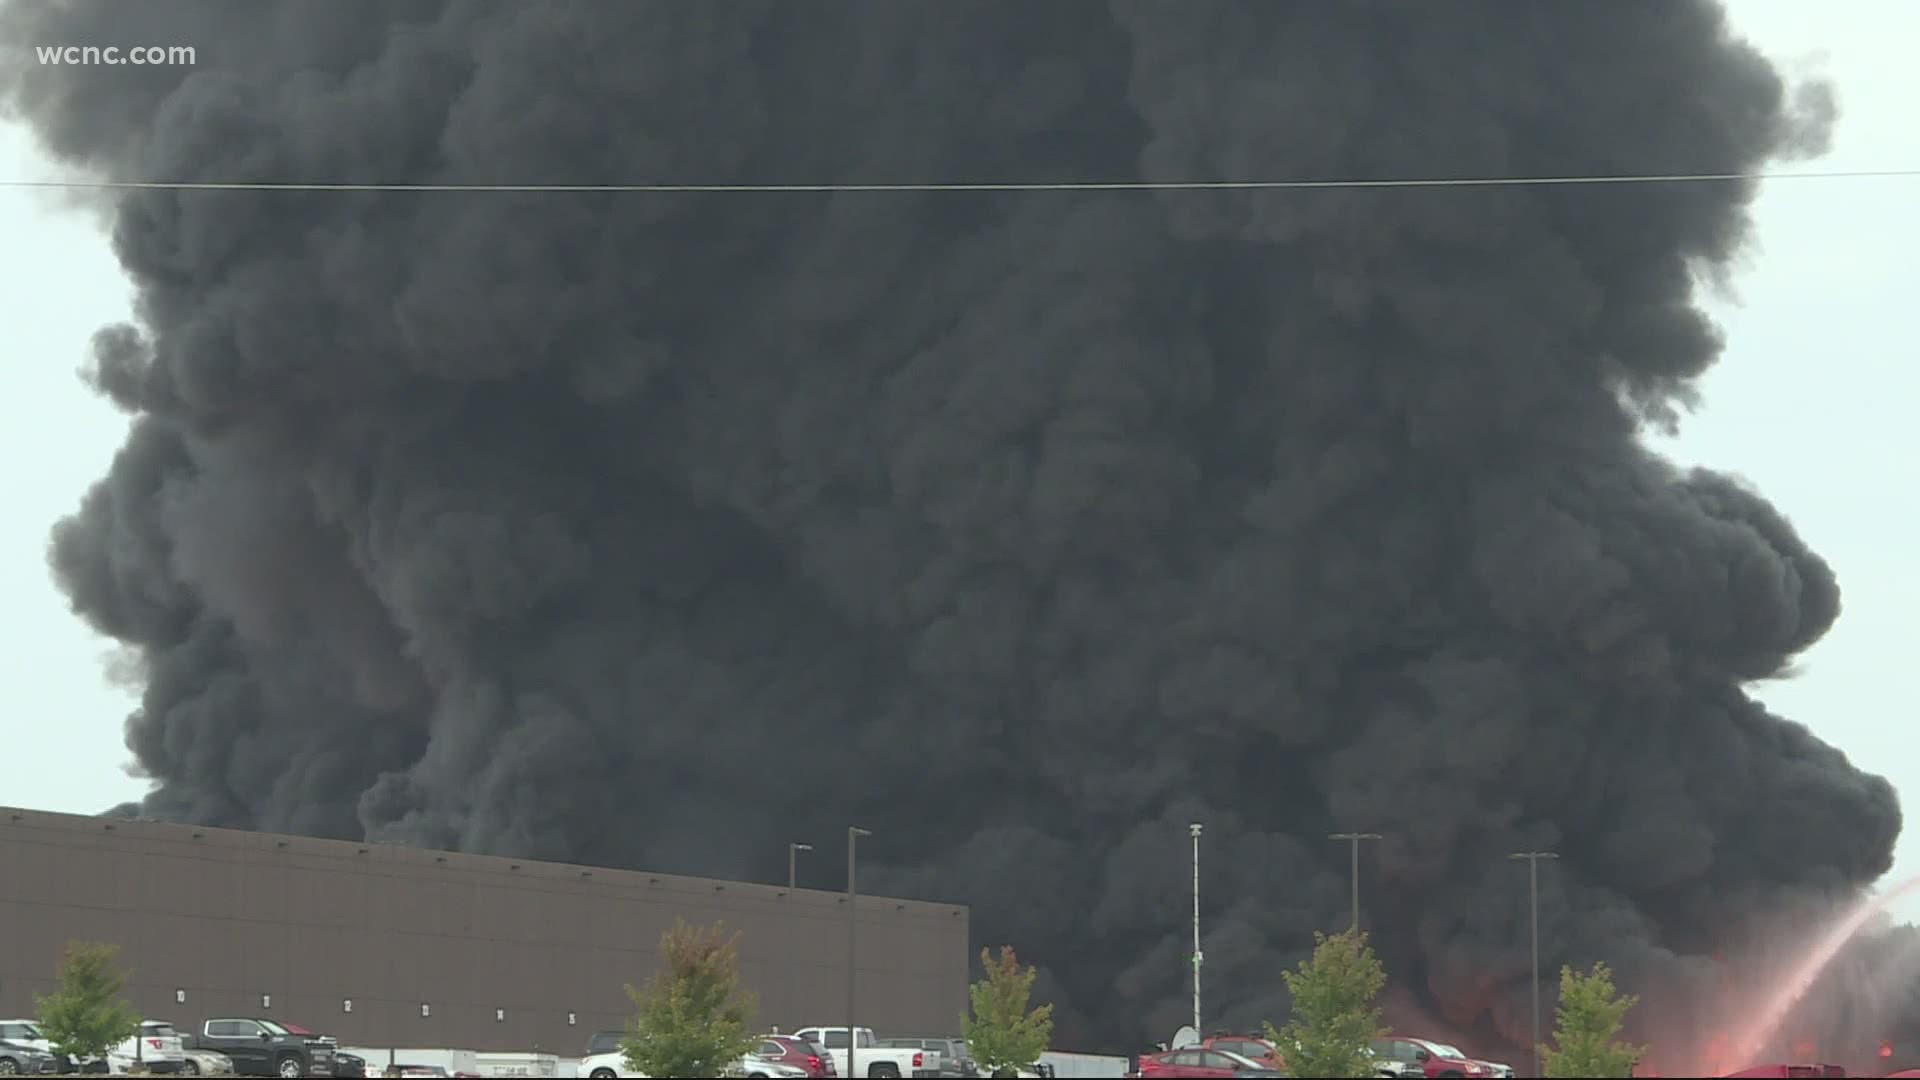 A huge smoke plume can be seen from miles away as firefighters work to continue the industrial fire.